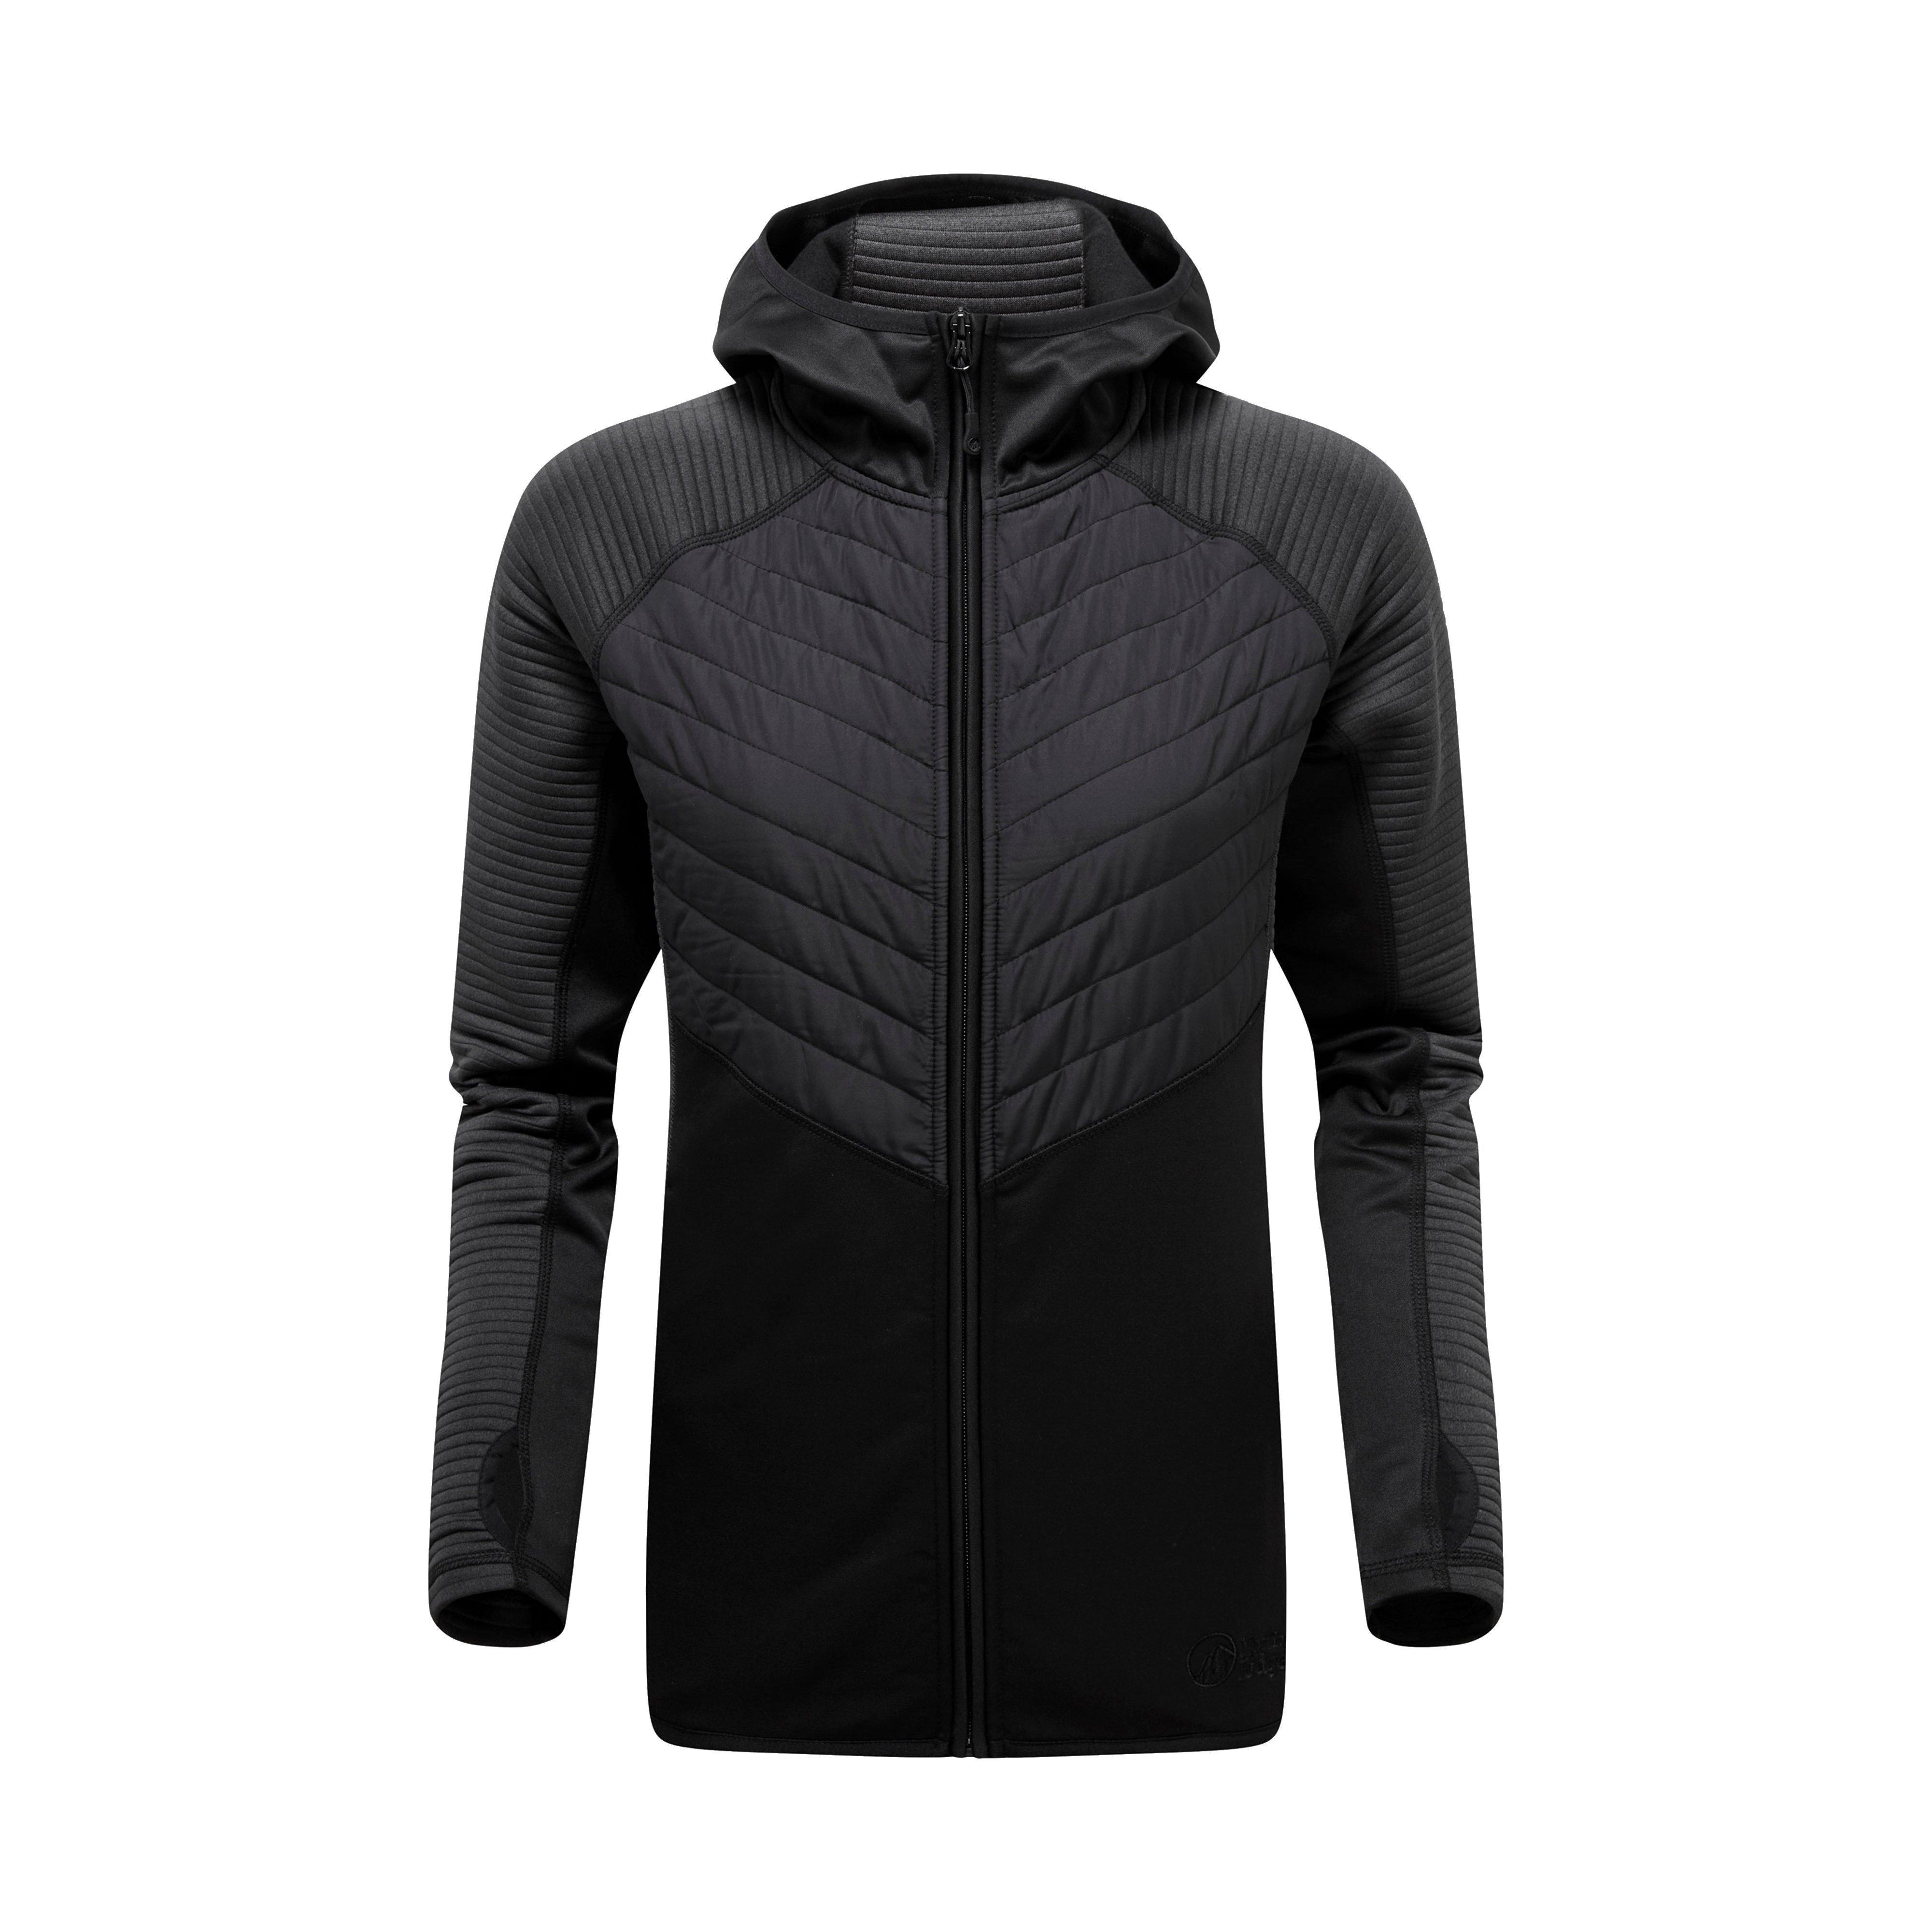 Core Intent Insulated Jacket | Millets